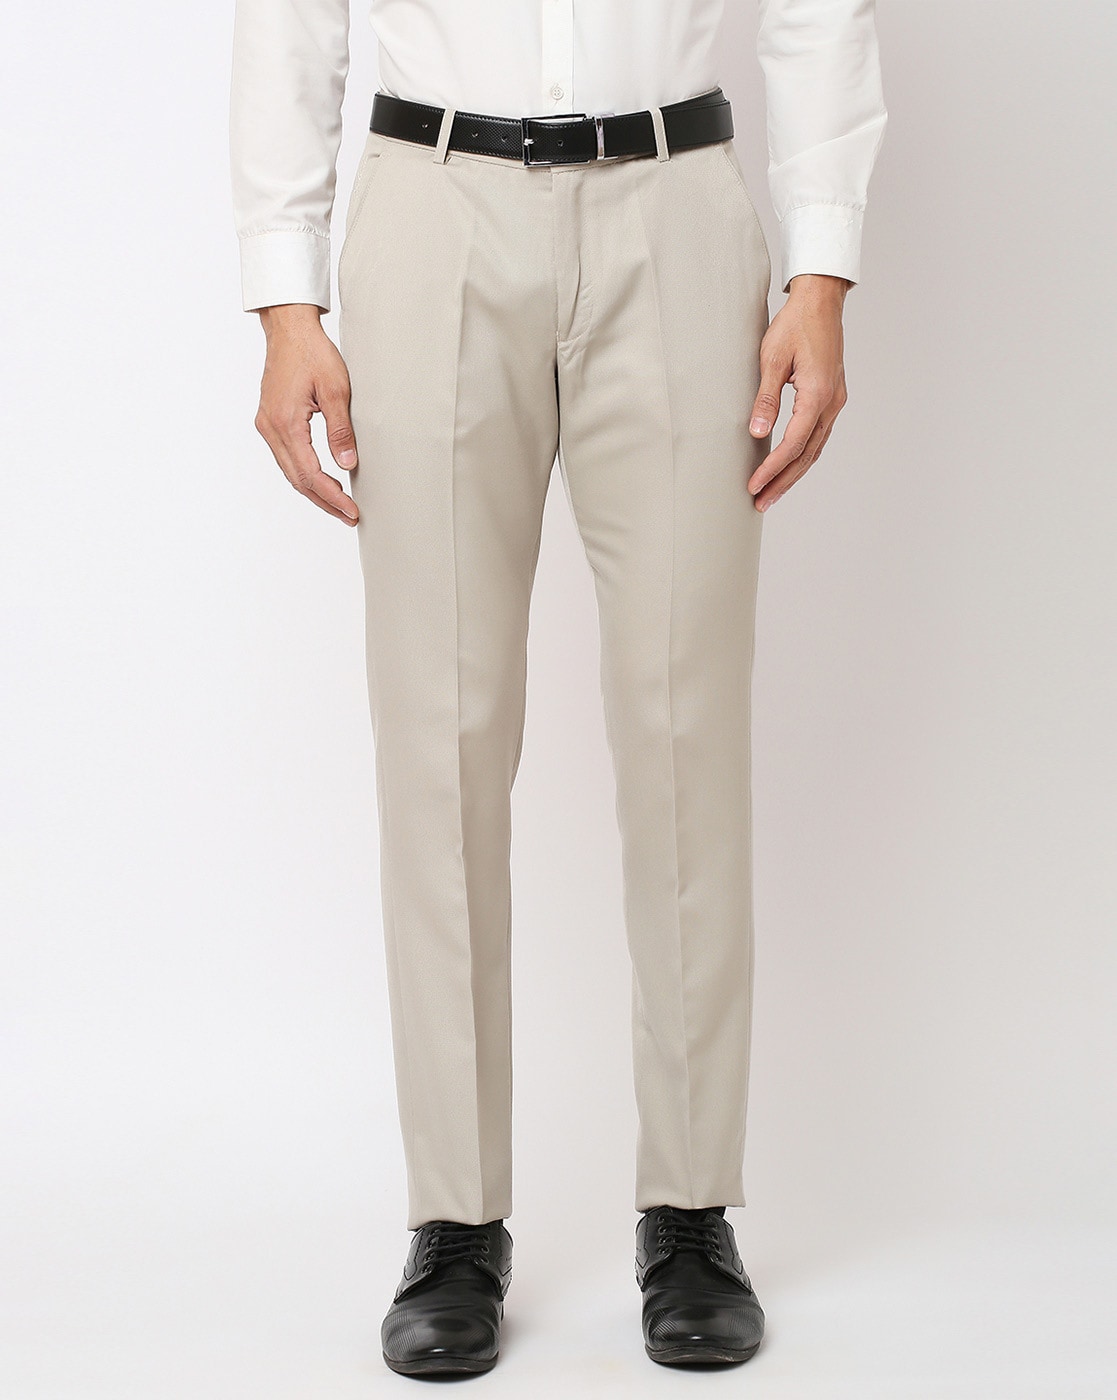 Beige Herringbone Tailored Linen Italian Suit Trousers  1913 Collection   Hawes and Curtis